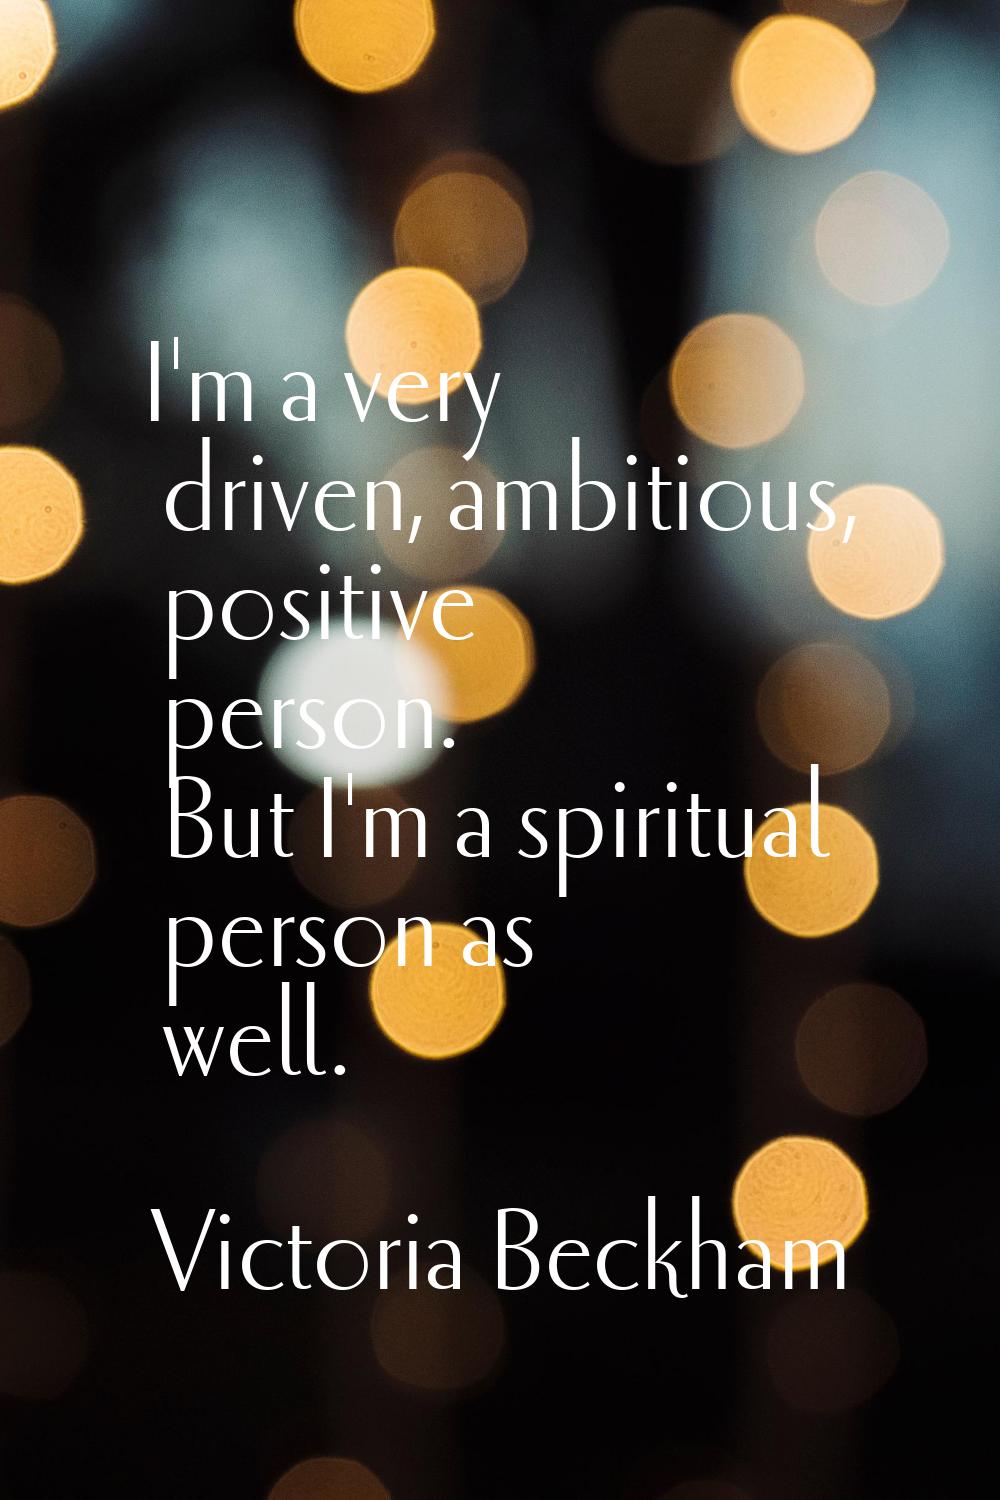 I'm a very driven, ambitious, positive person. But I'm a spiritual person as well.